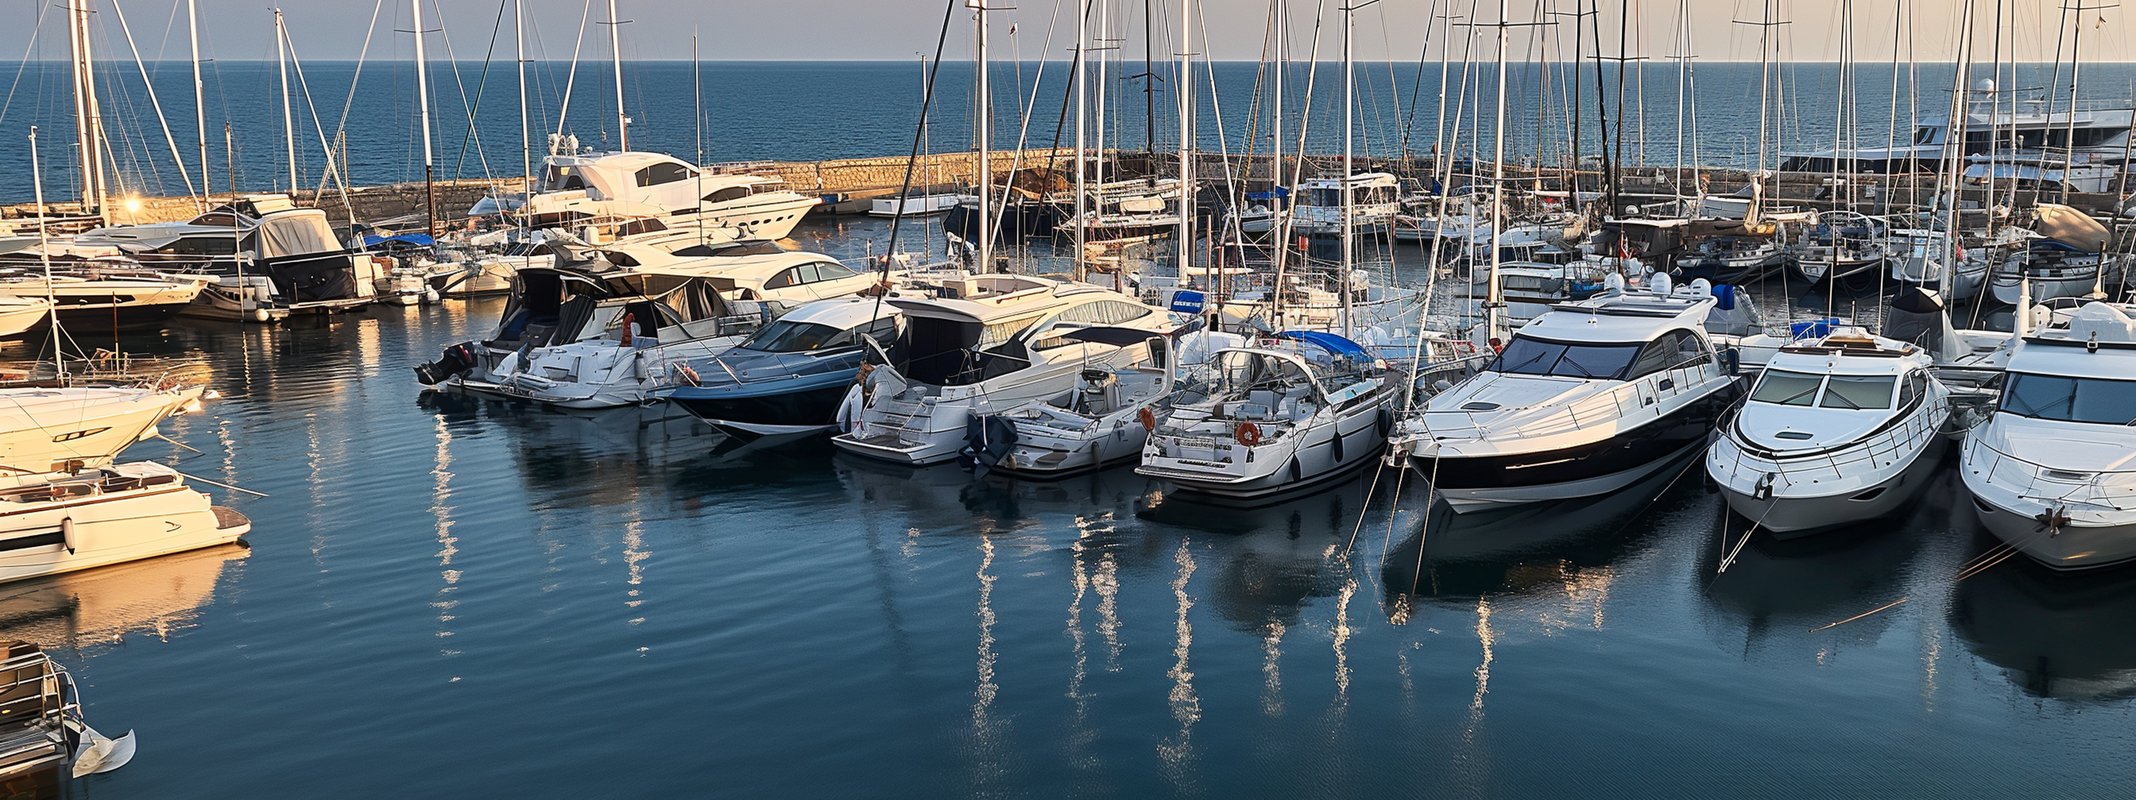 Challenges continue for Larnaca Marina-Port project